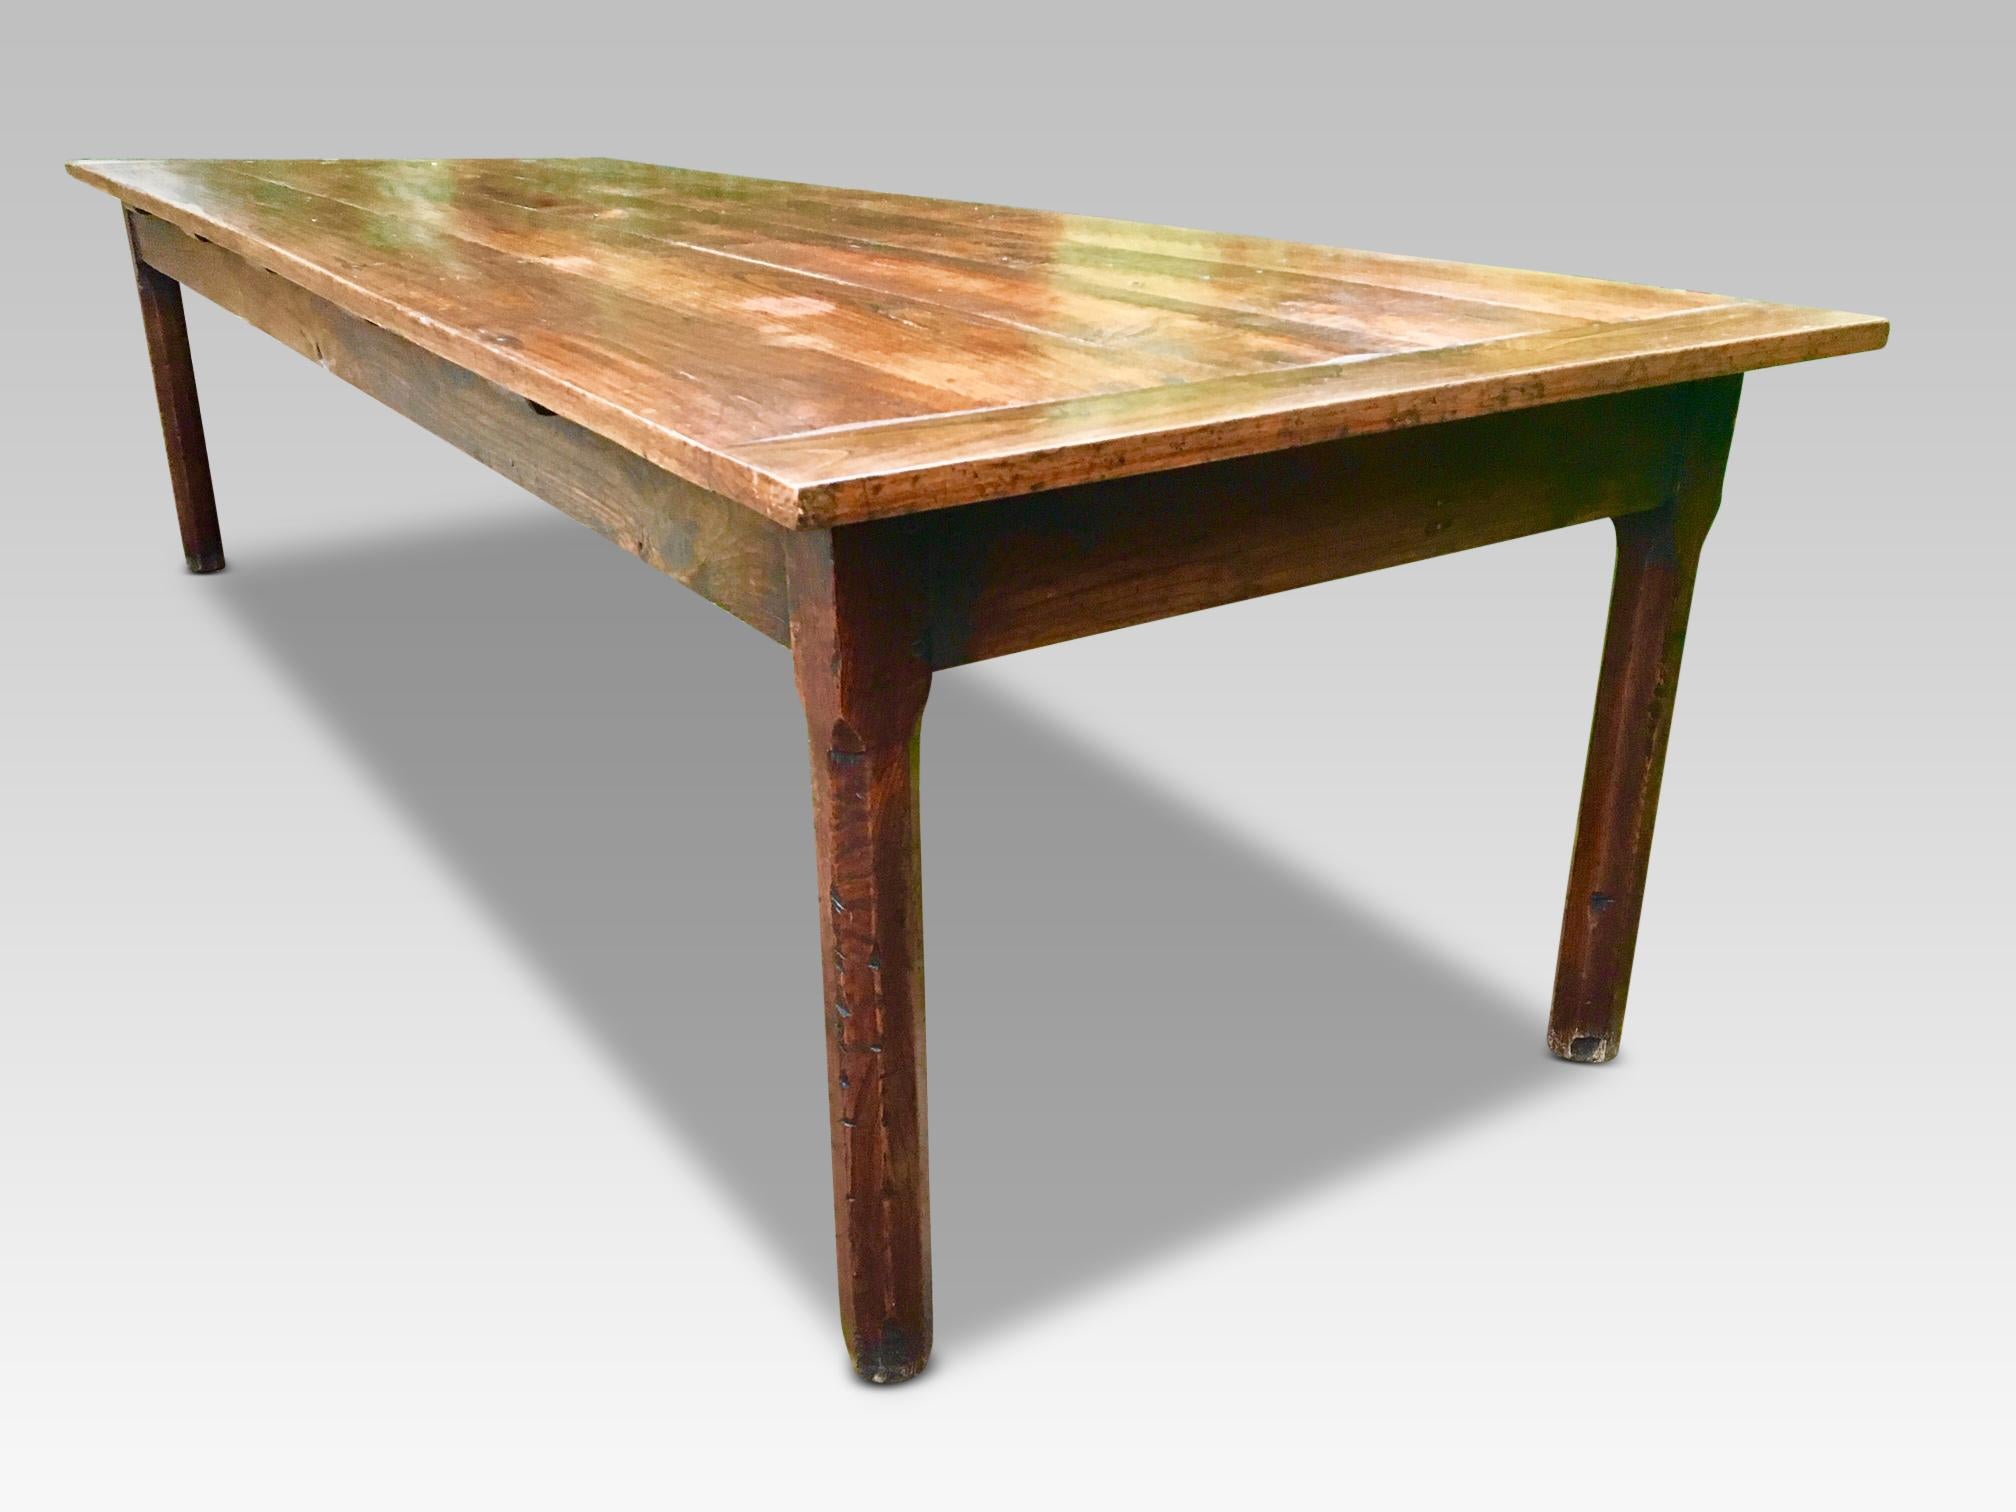 Hand-Crafted Chestnut Farmhouse Table, 2.95 mtrs